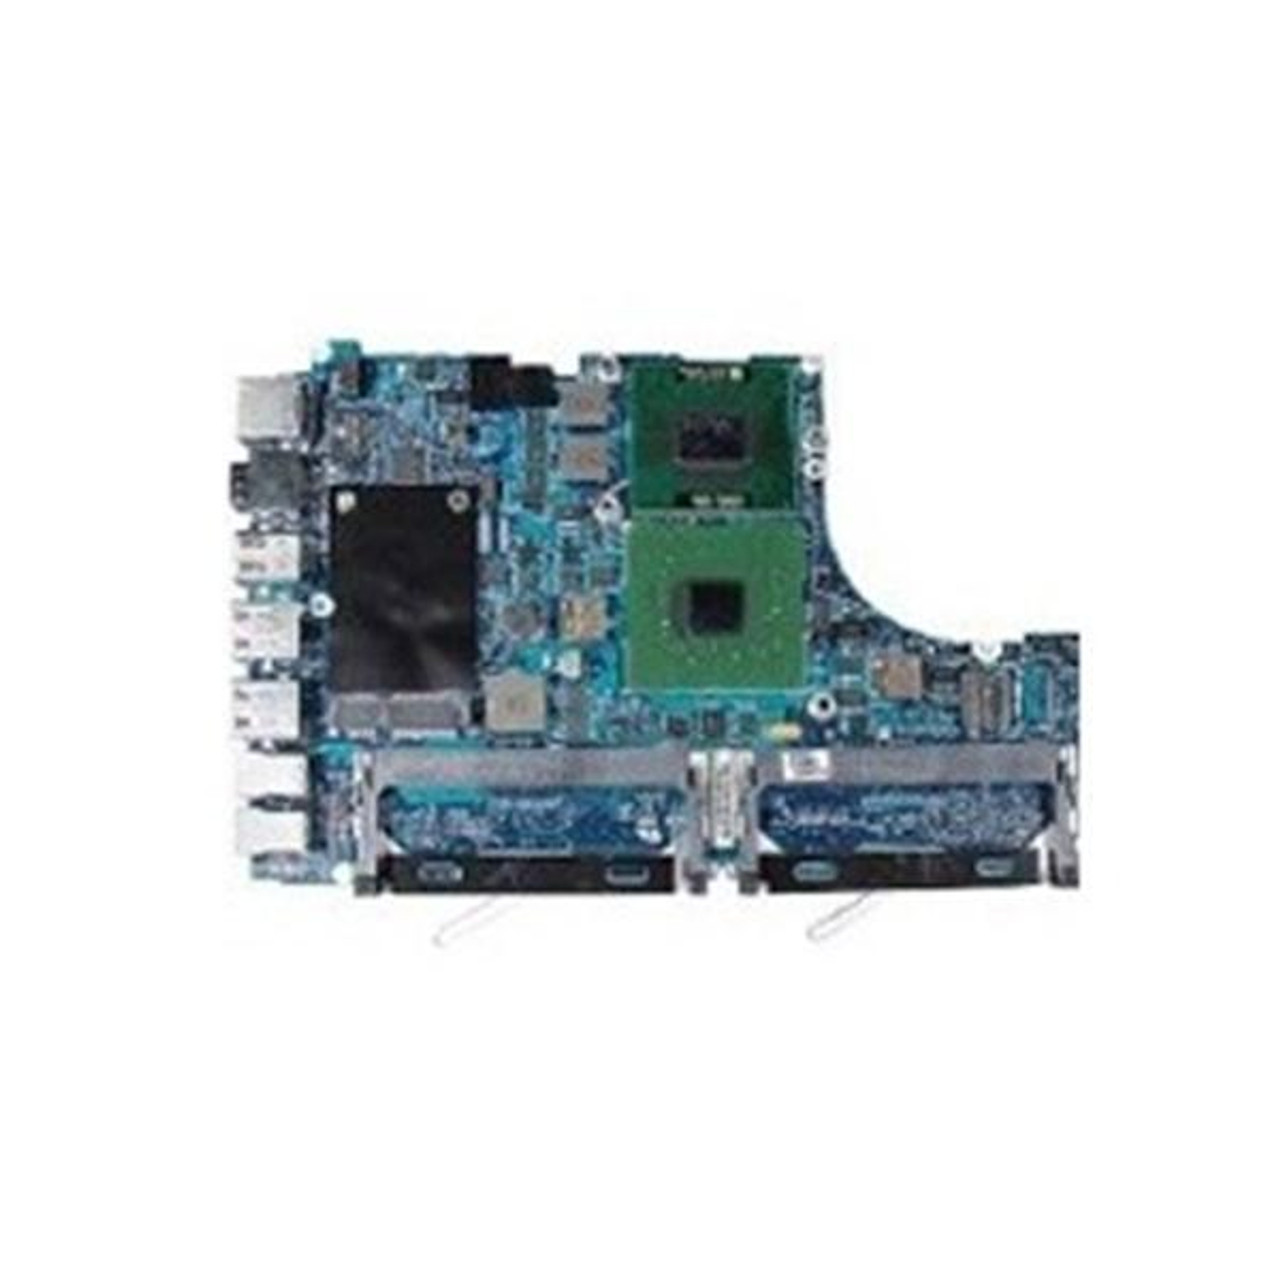 820-2279-A Apple System Board (Motherboard) 2.10GHz CPU for PowerPC 970fx (G5) (Refurbished)